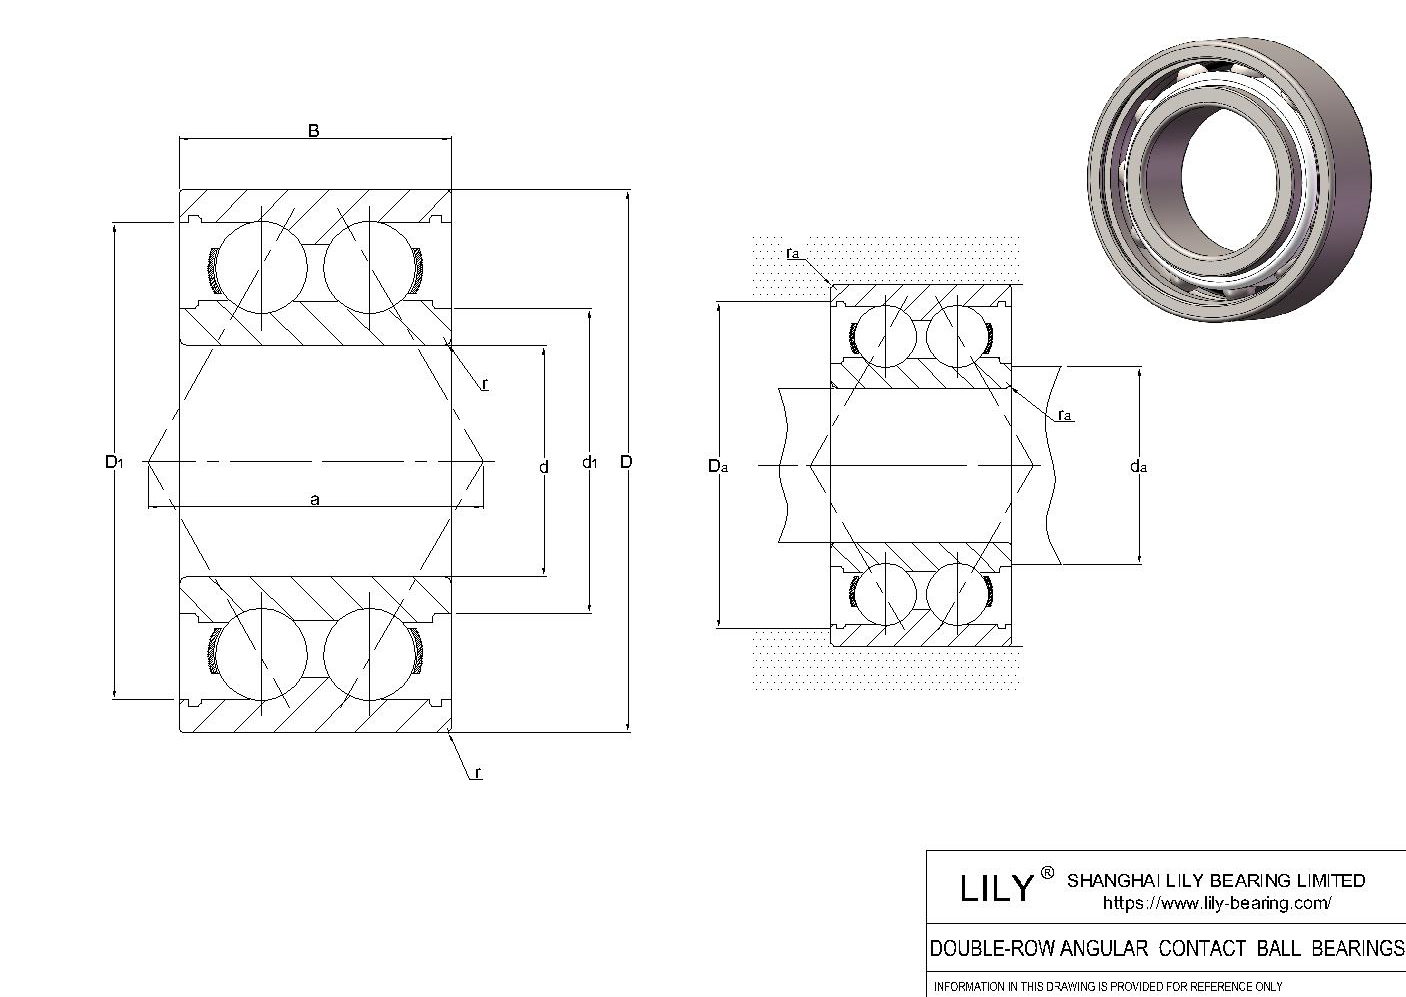 SS3211 2RS Stainless Steel Double Row Angular Contact Ball Bearings cad drawing